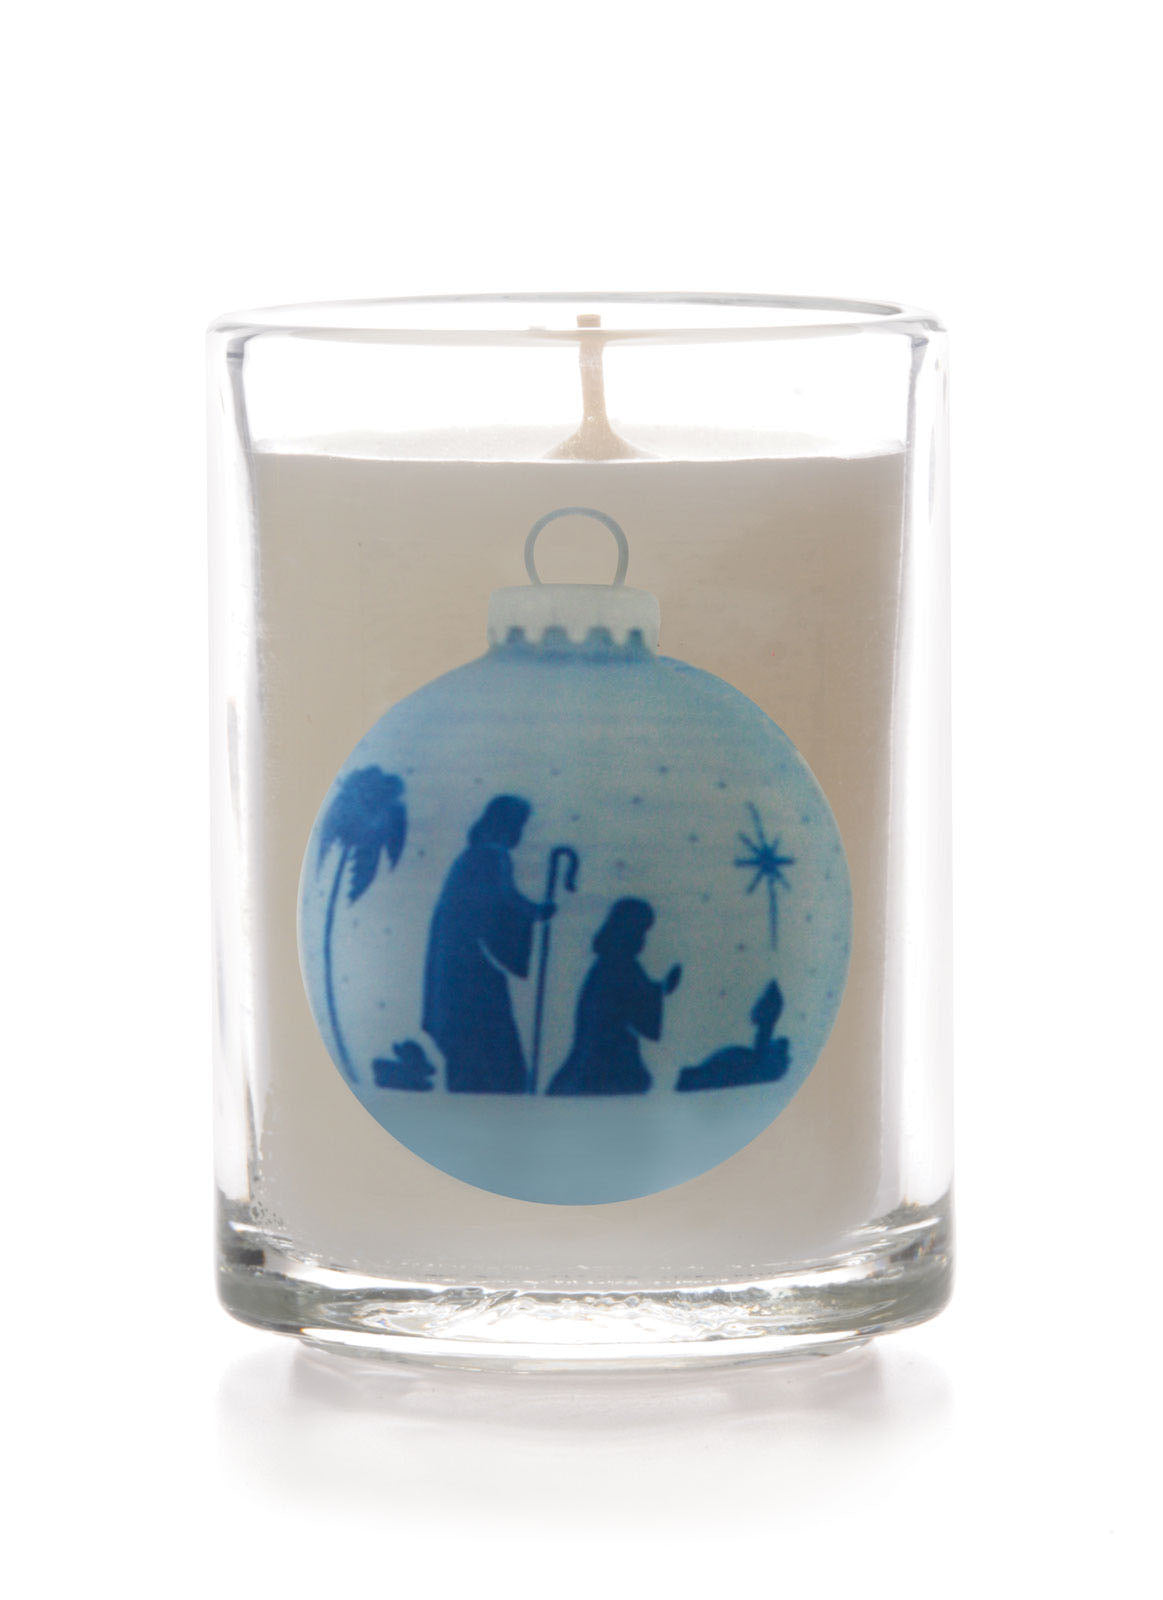 Christmas Candle - Joseph, Mary &  Child  (Non Scented)  (Jmc01)Christmas Candle - Joseph, Mary &  Child  (Non Scented)  (Jmc01)